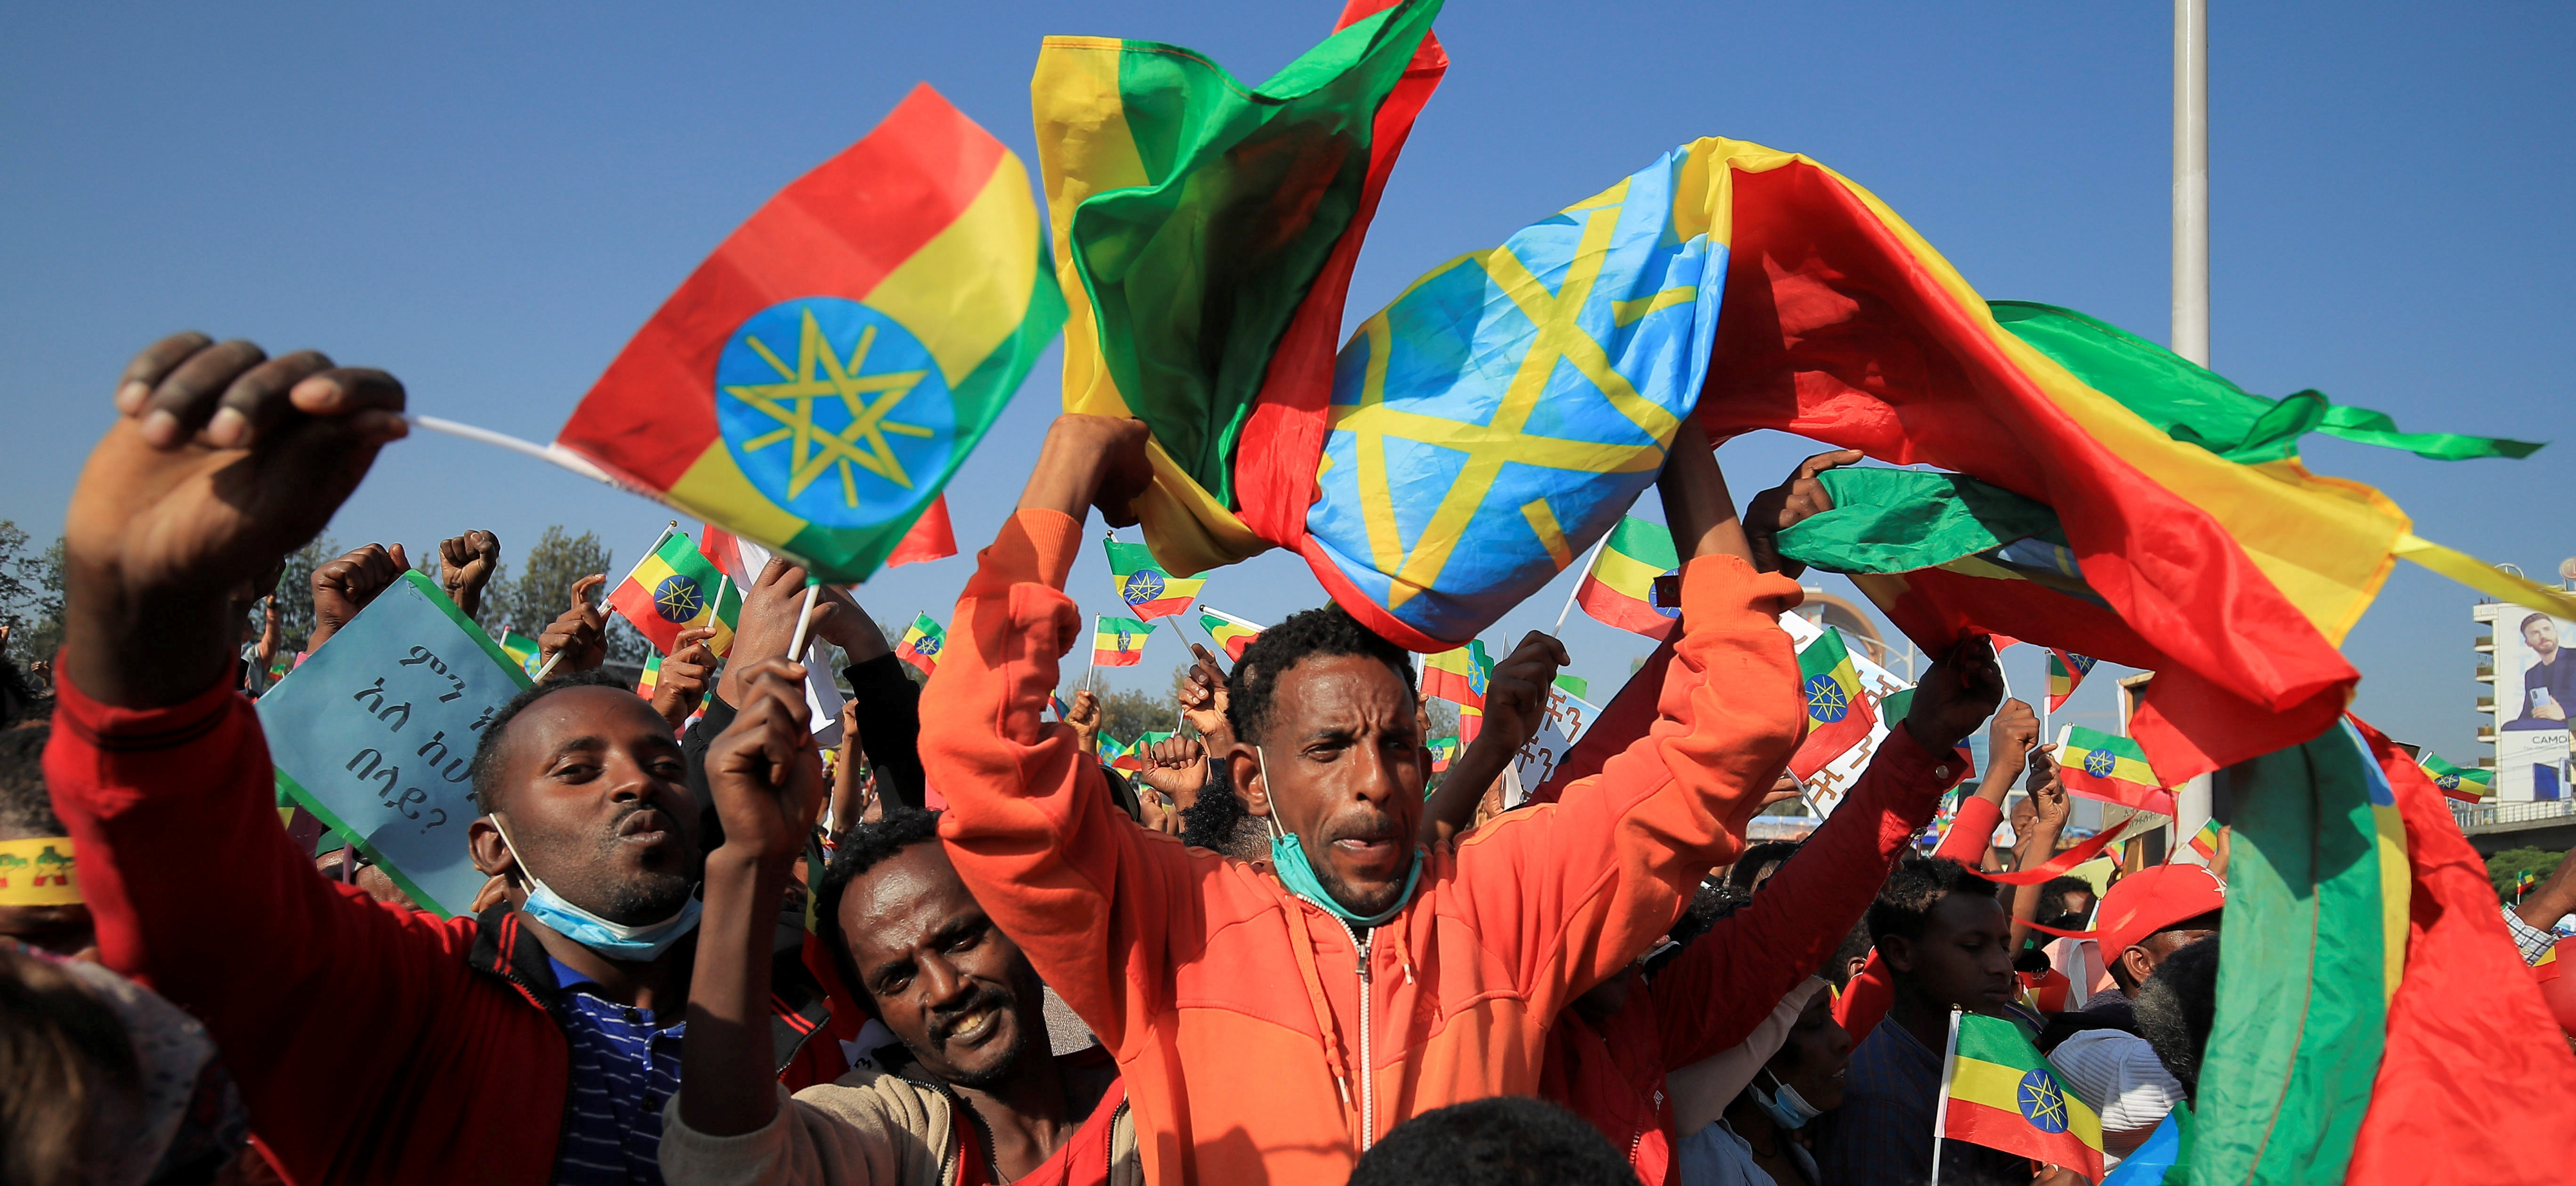 Twitter’s Ethiopian interventions may not have worked